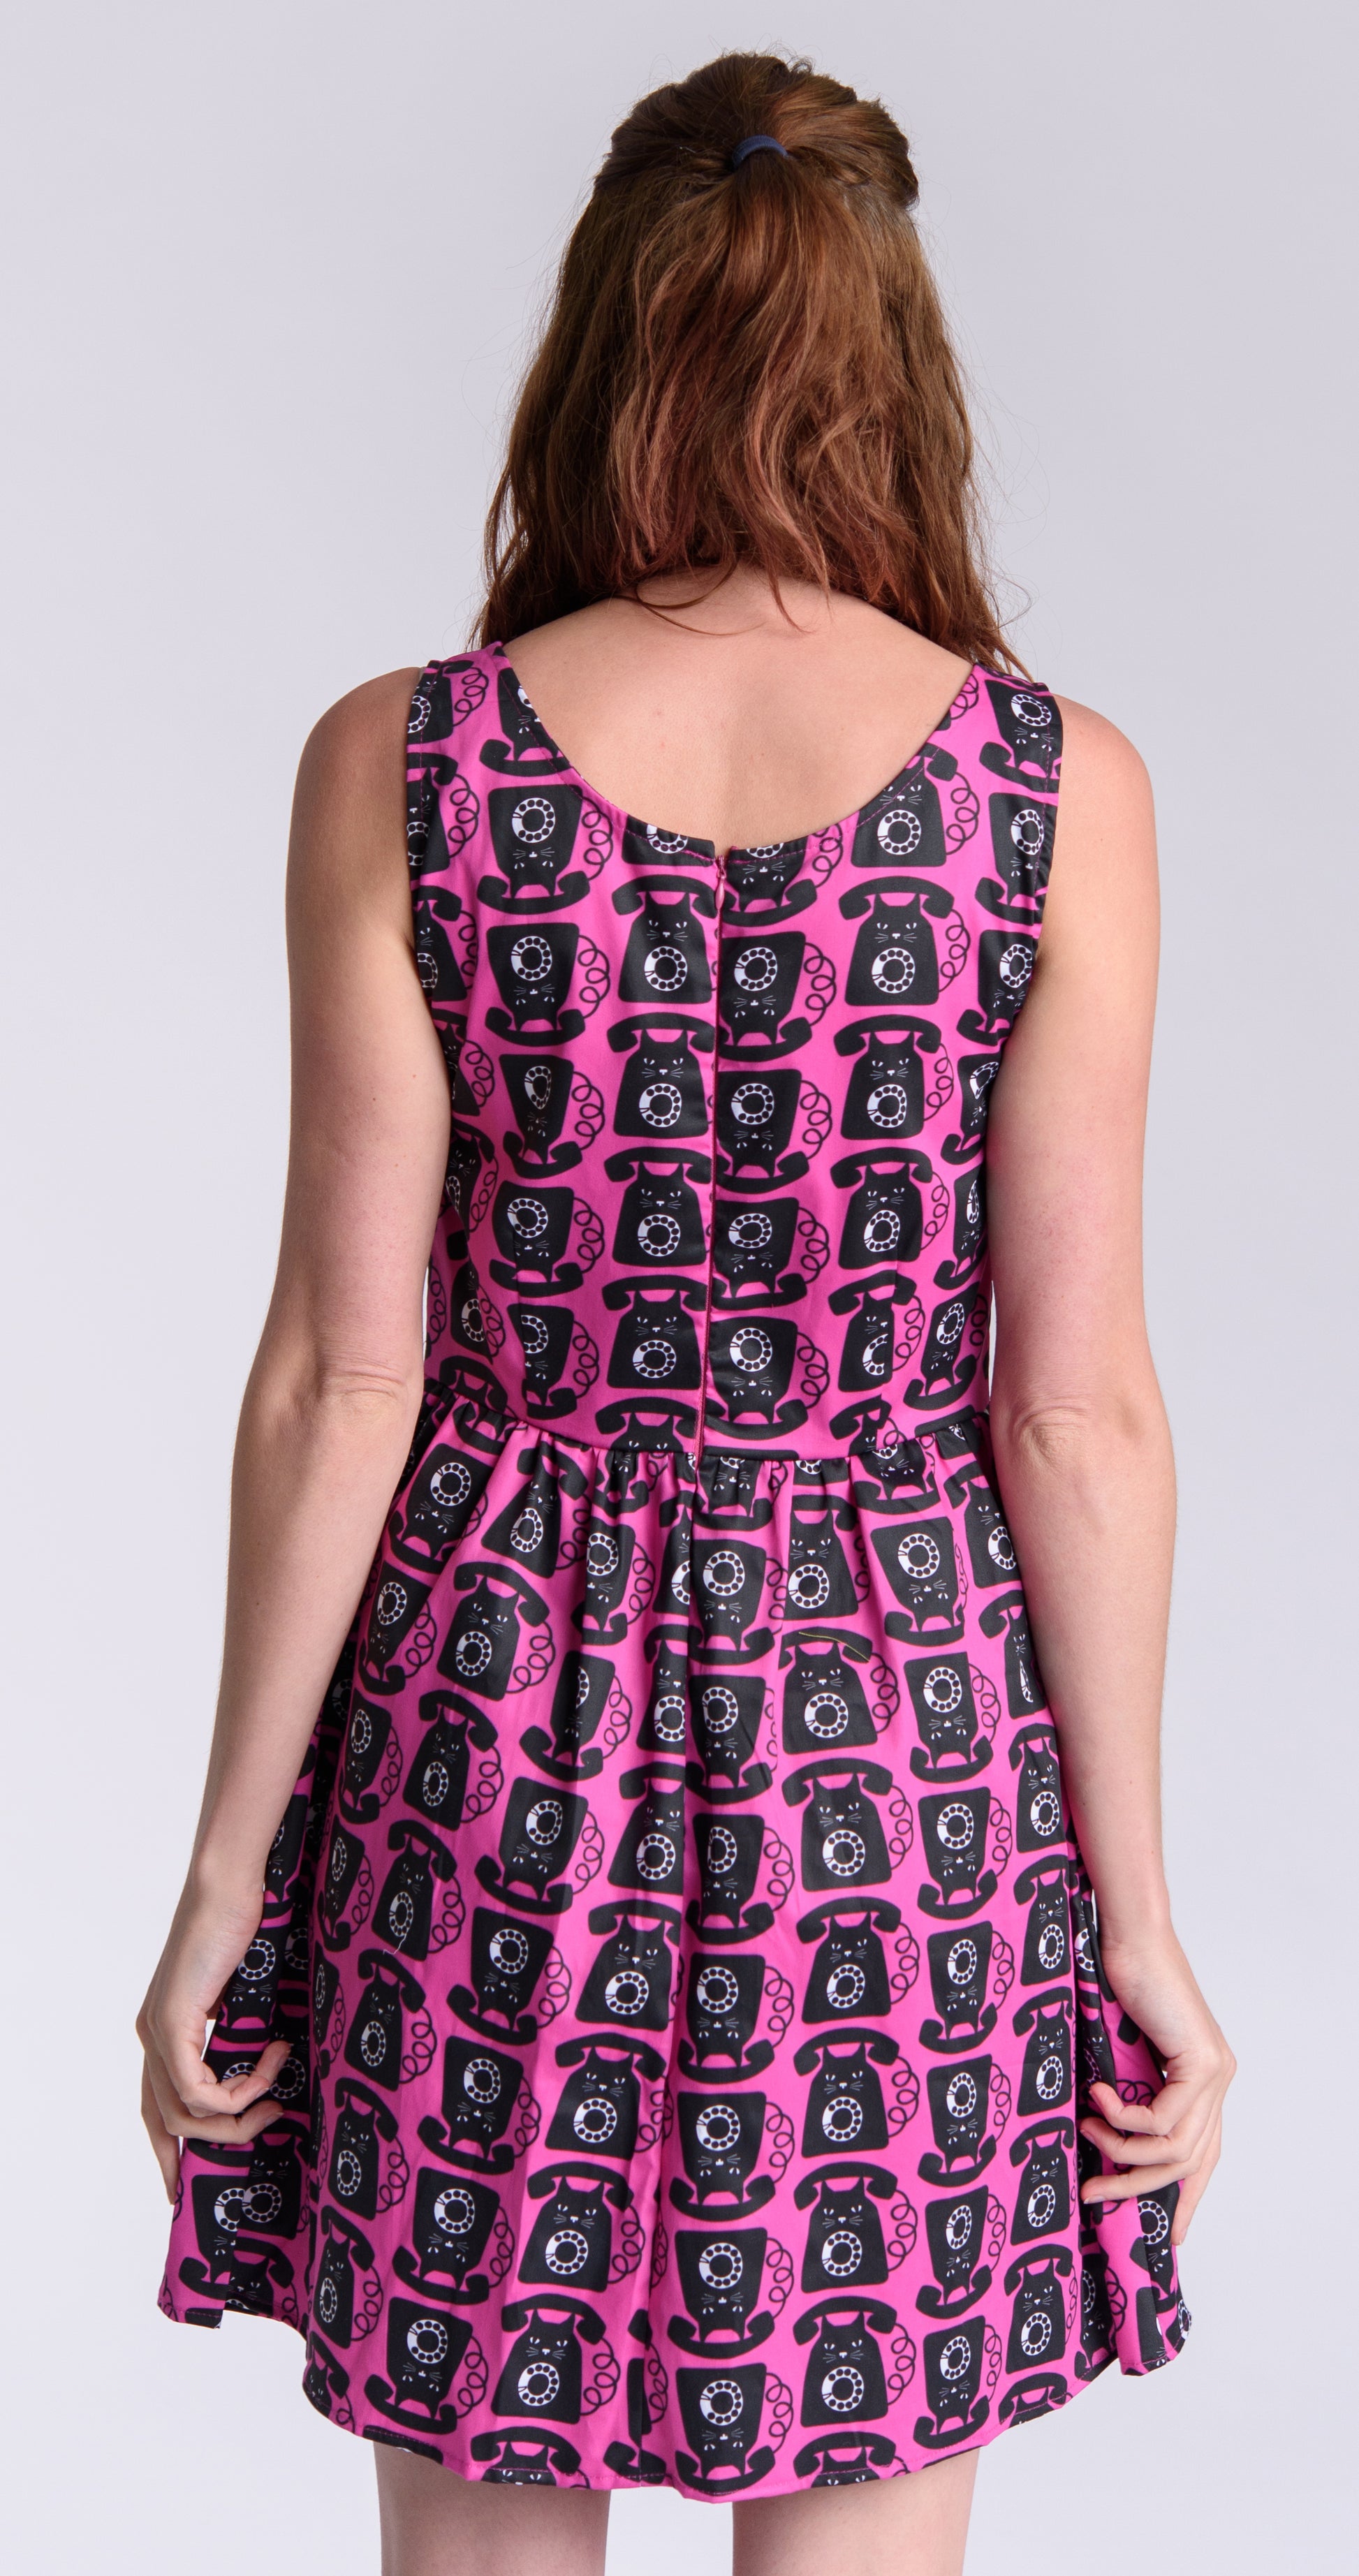 Back view of model wearing bright pink black and white fit and flare dress